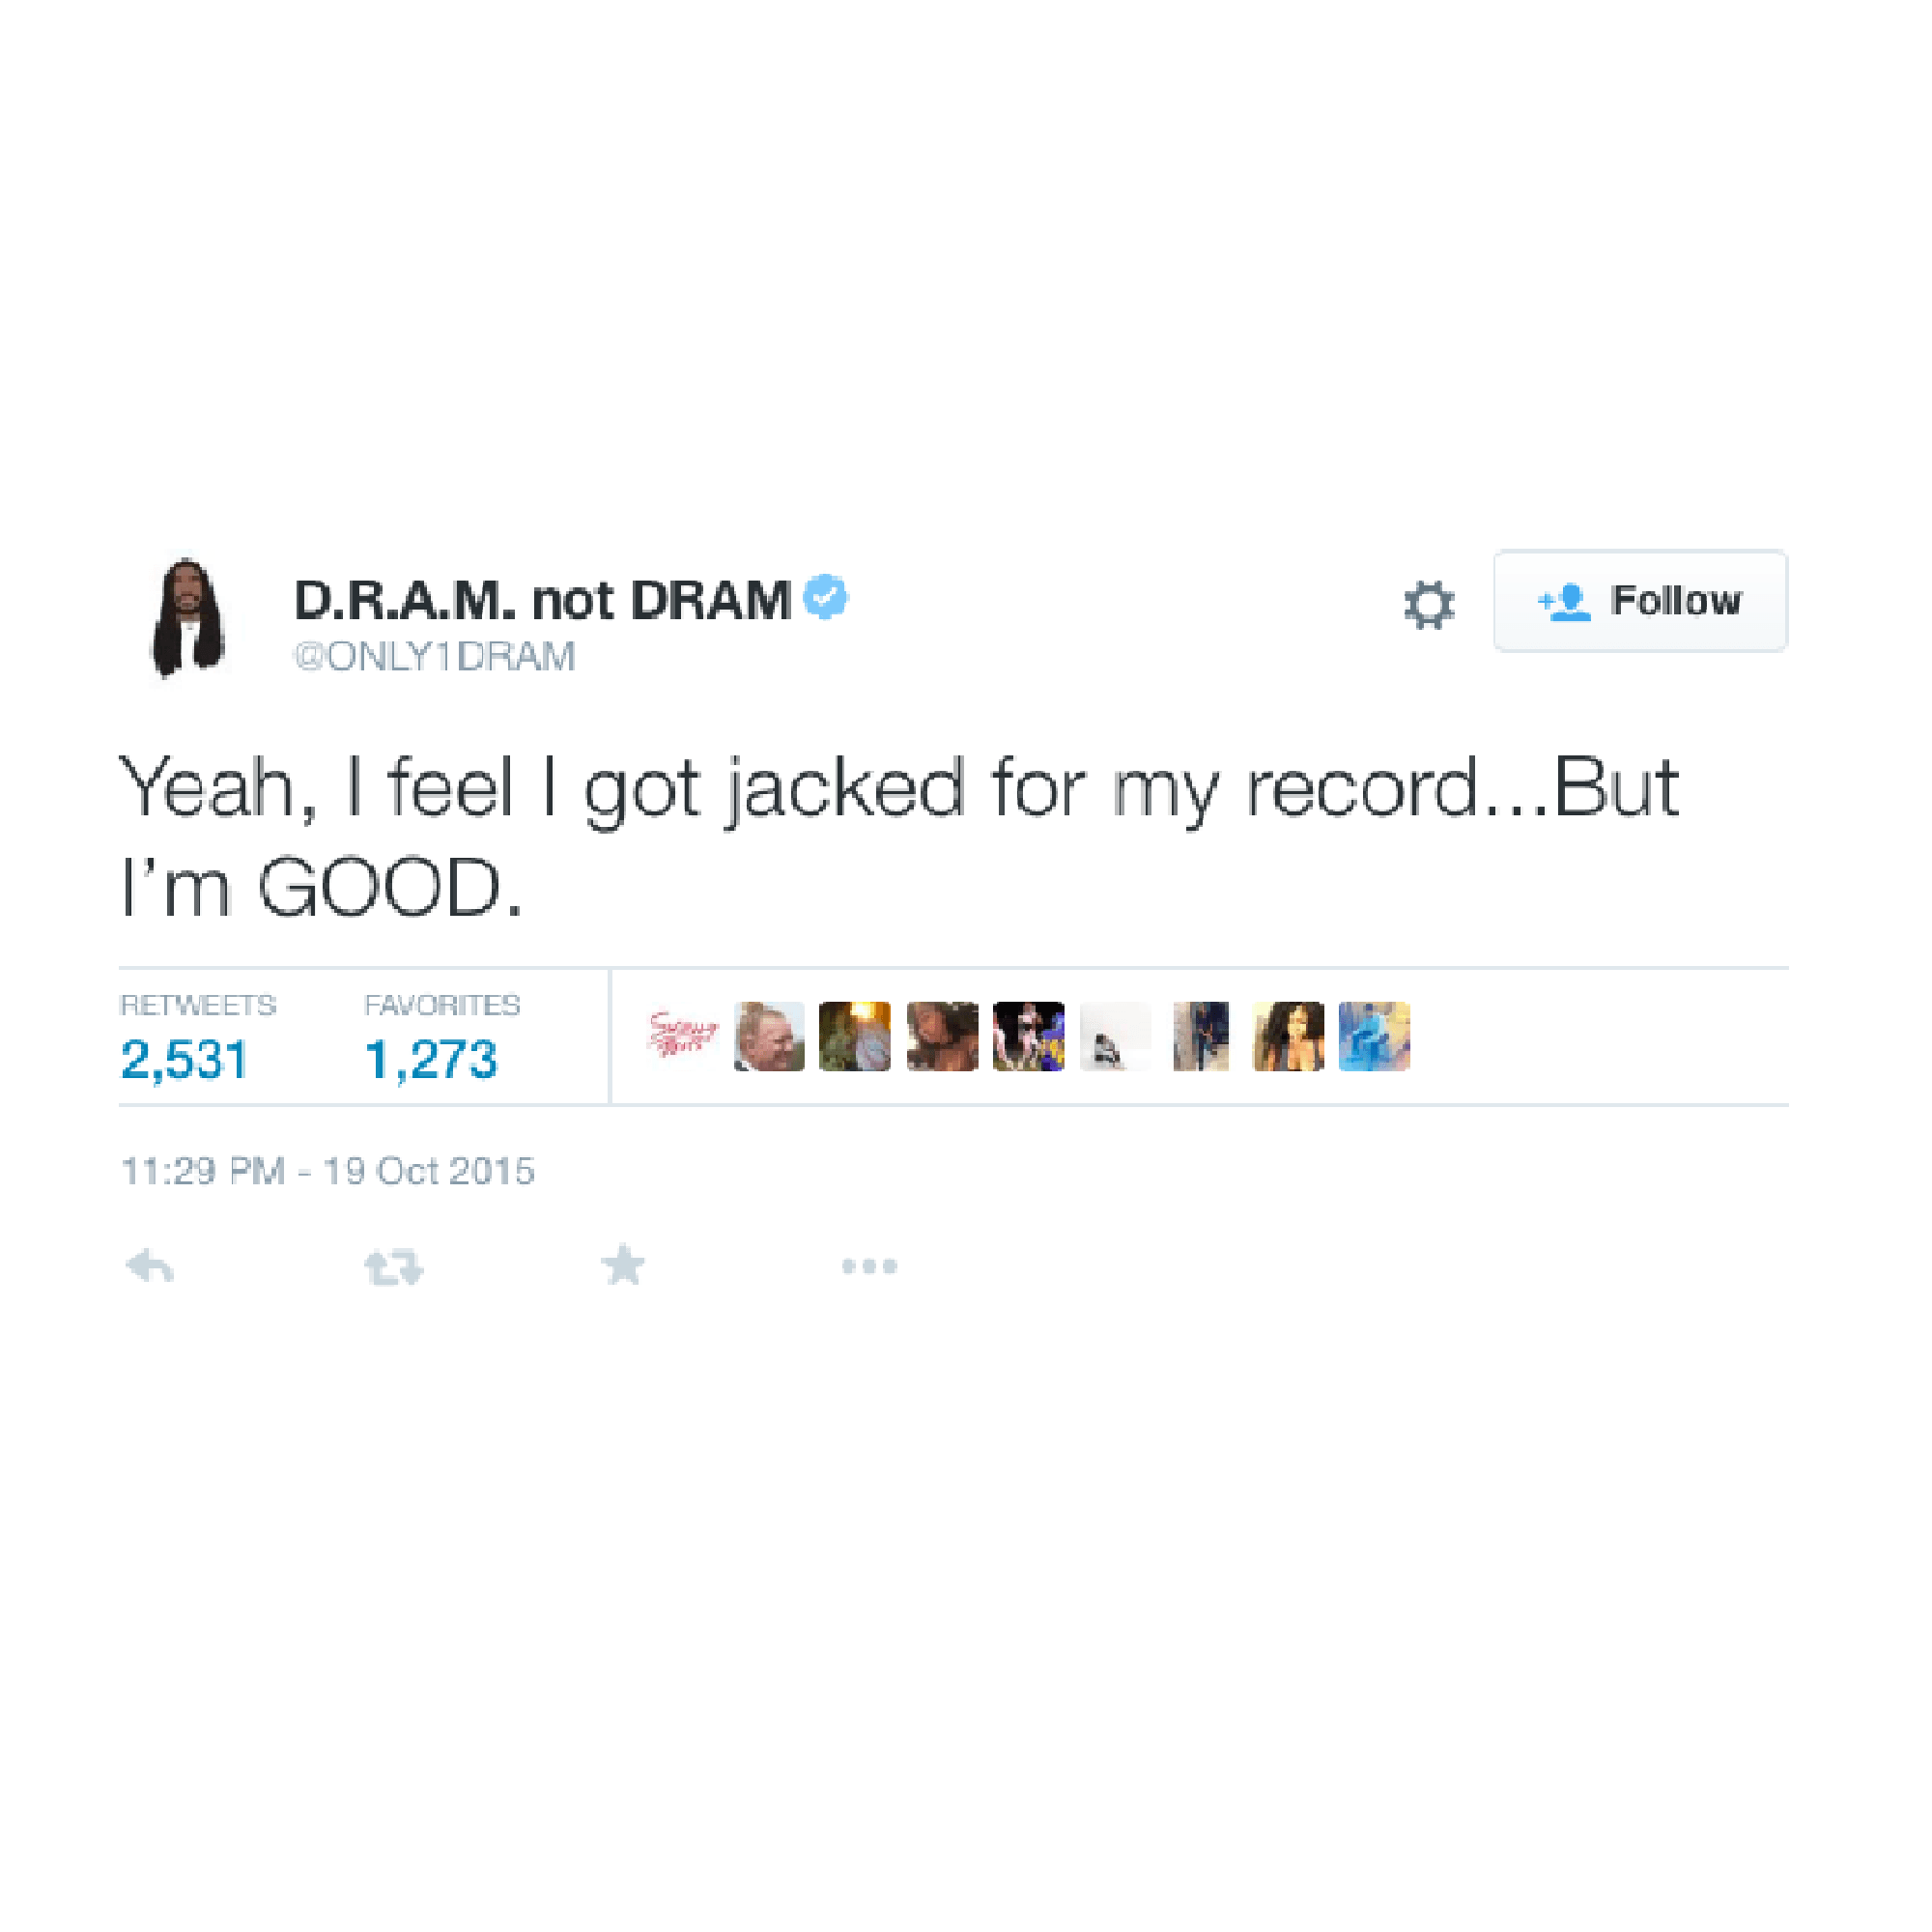 So Does Drake’s “Hotline Bling” & D.R.A.M.’s “Cha Cha” Really Sound Alike?